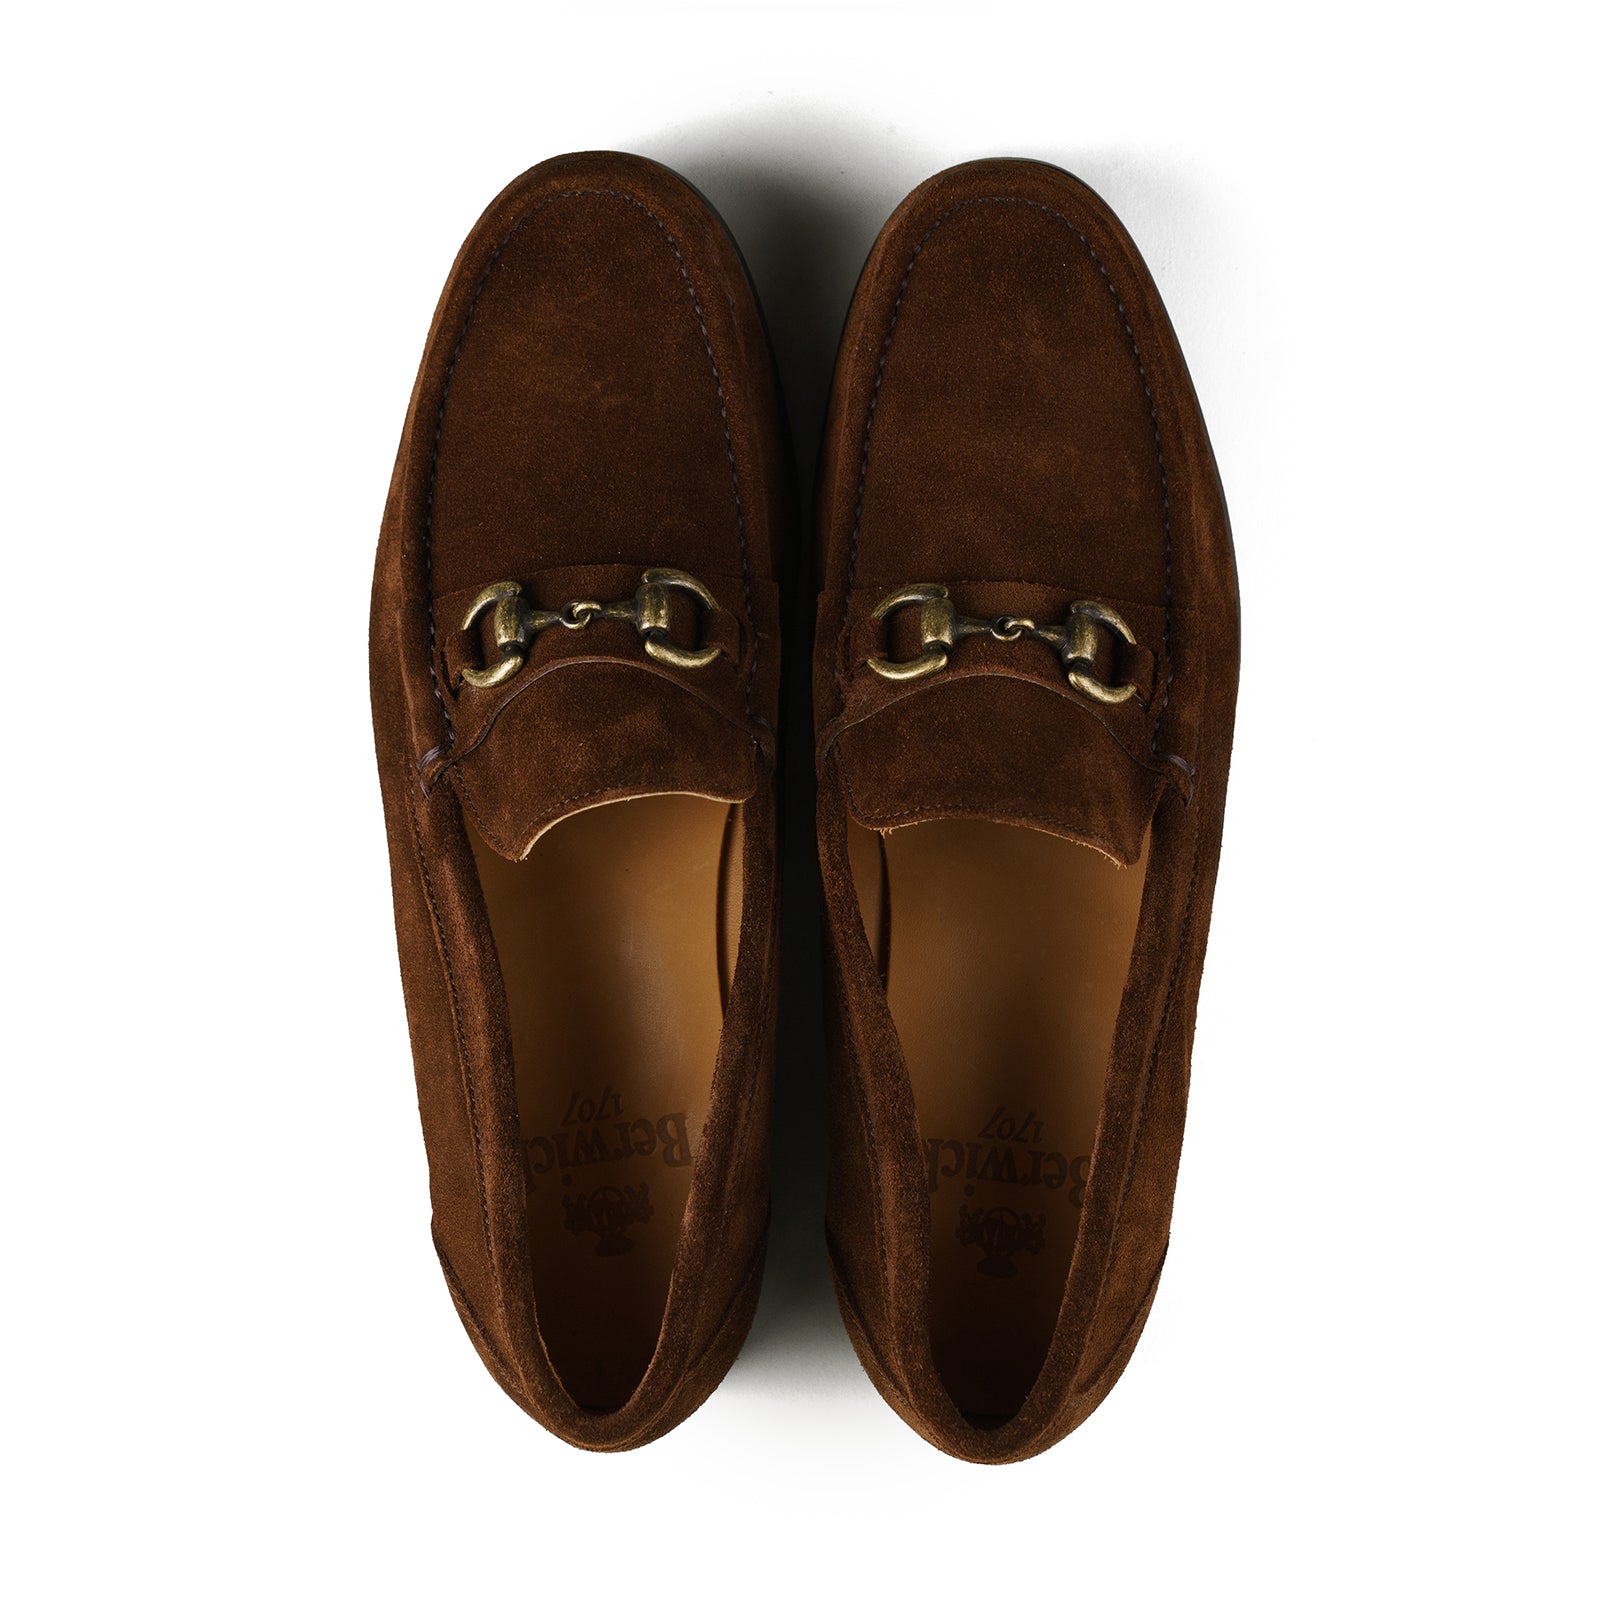 Bologna Bit Loafer - Snuff Brown Suede